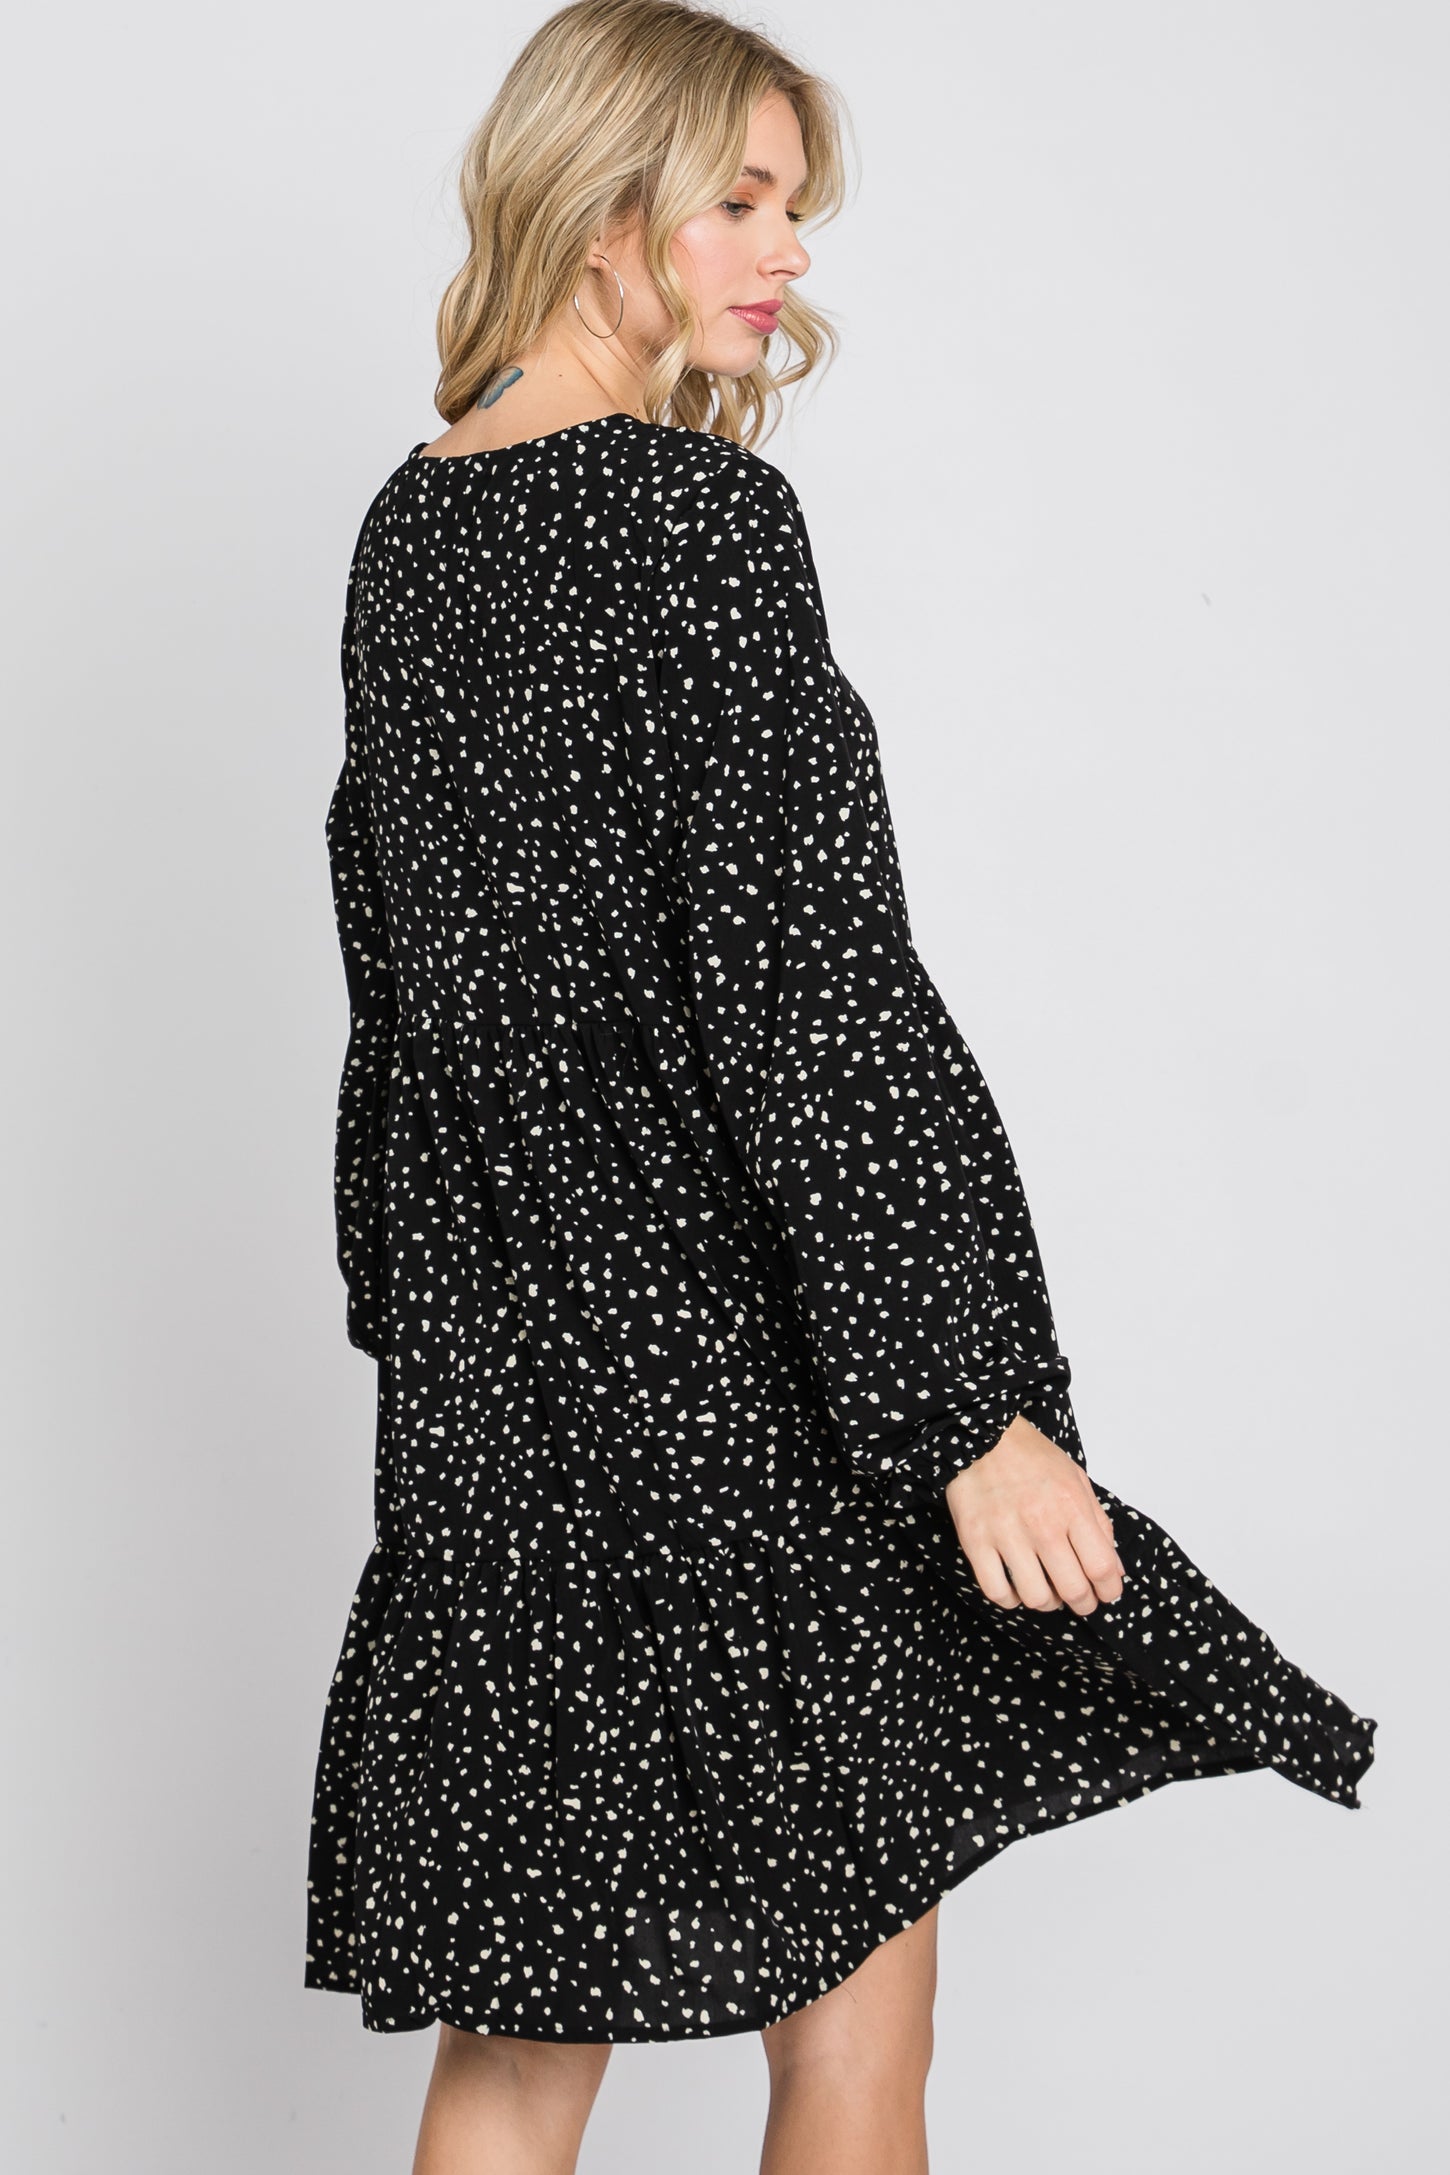 Black Spotted Tiered Dress